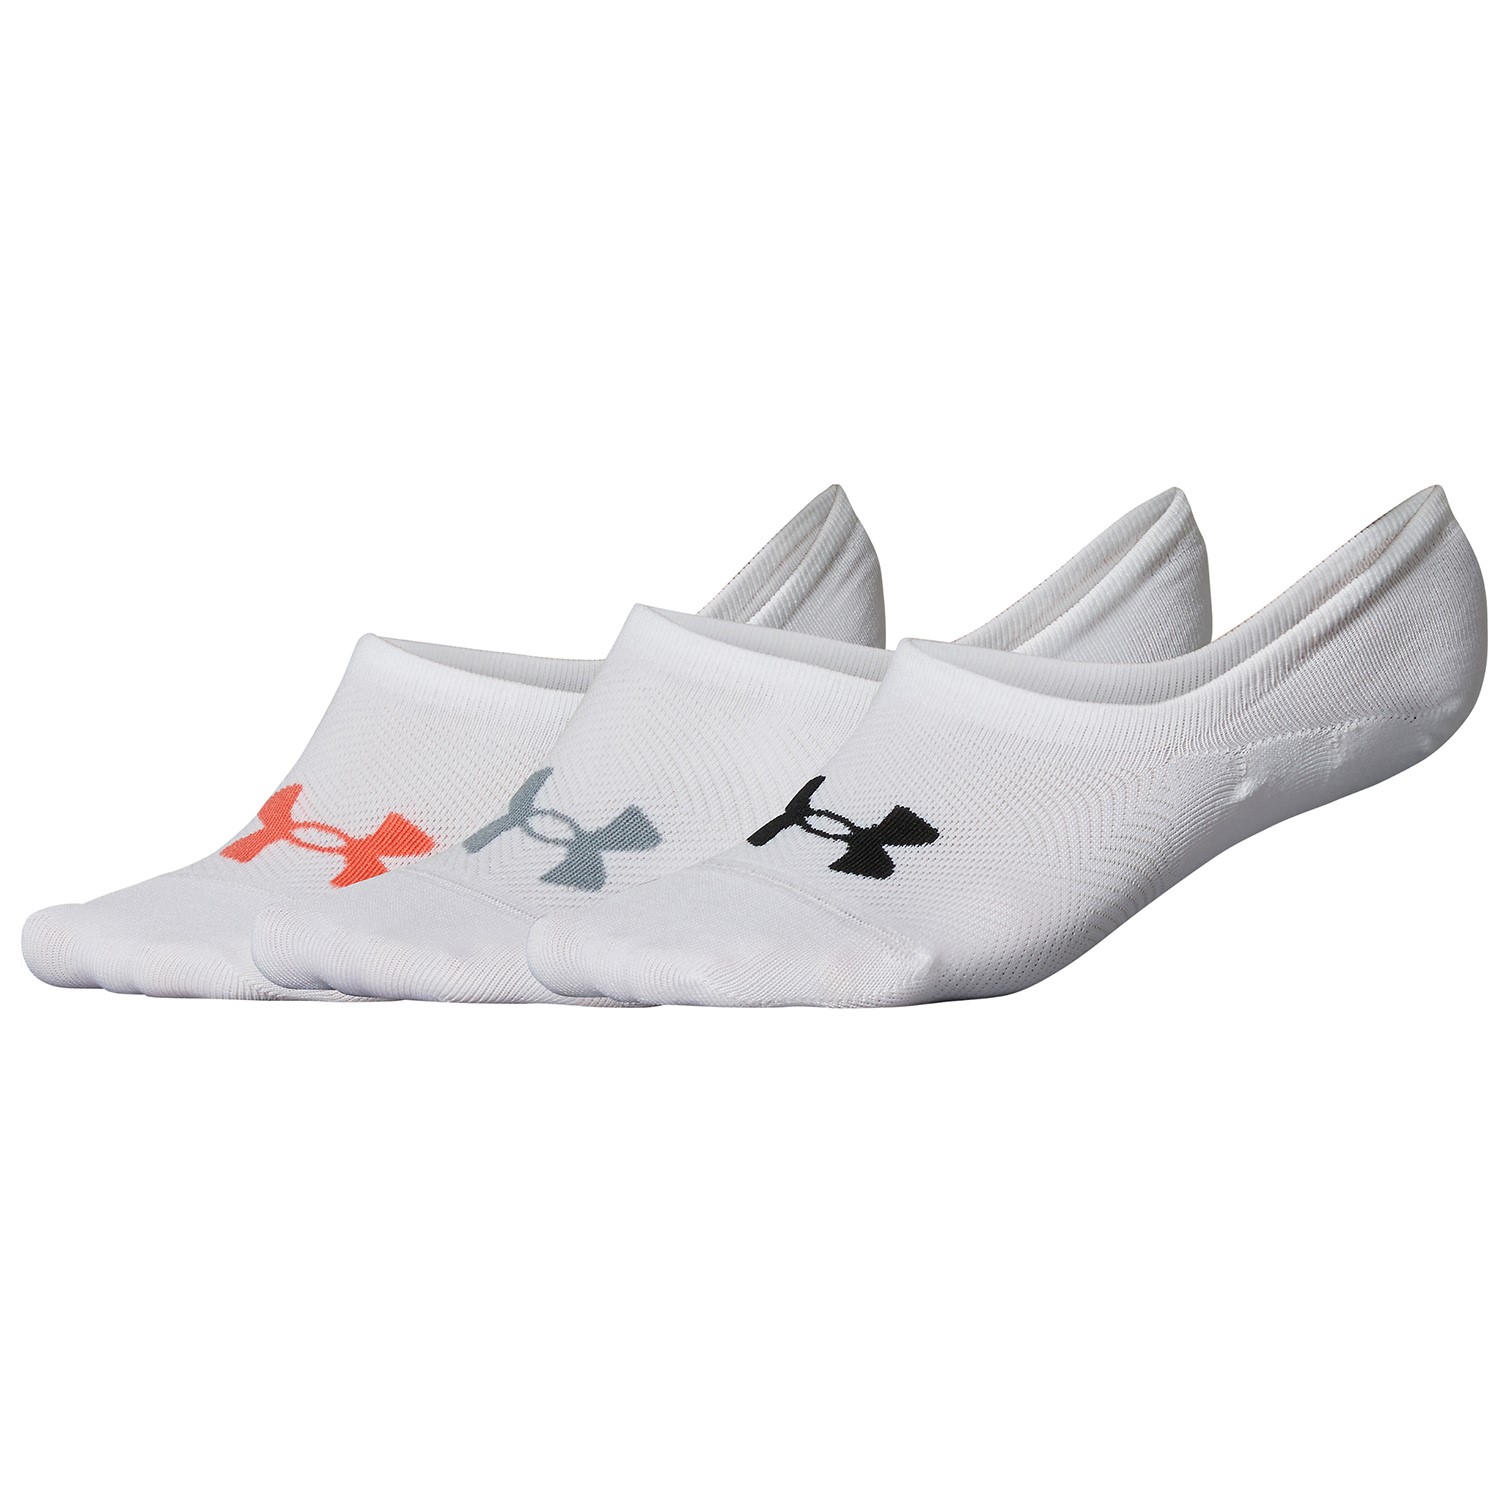 Under Armour Essential Ultra Low Liner Socks